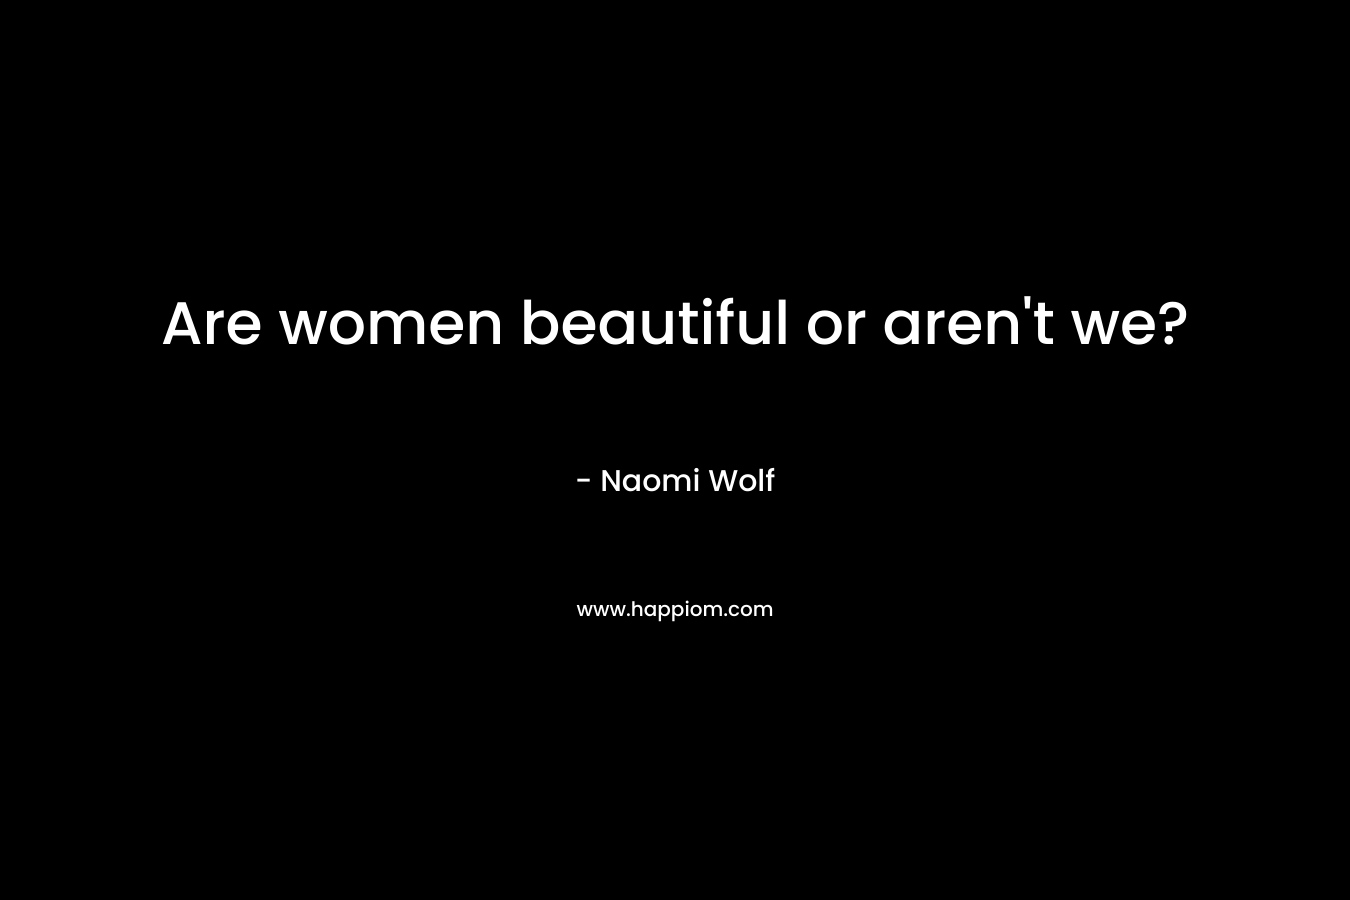 Are women beautiful or aren’t we? – Naomi Wolf